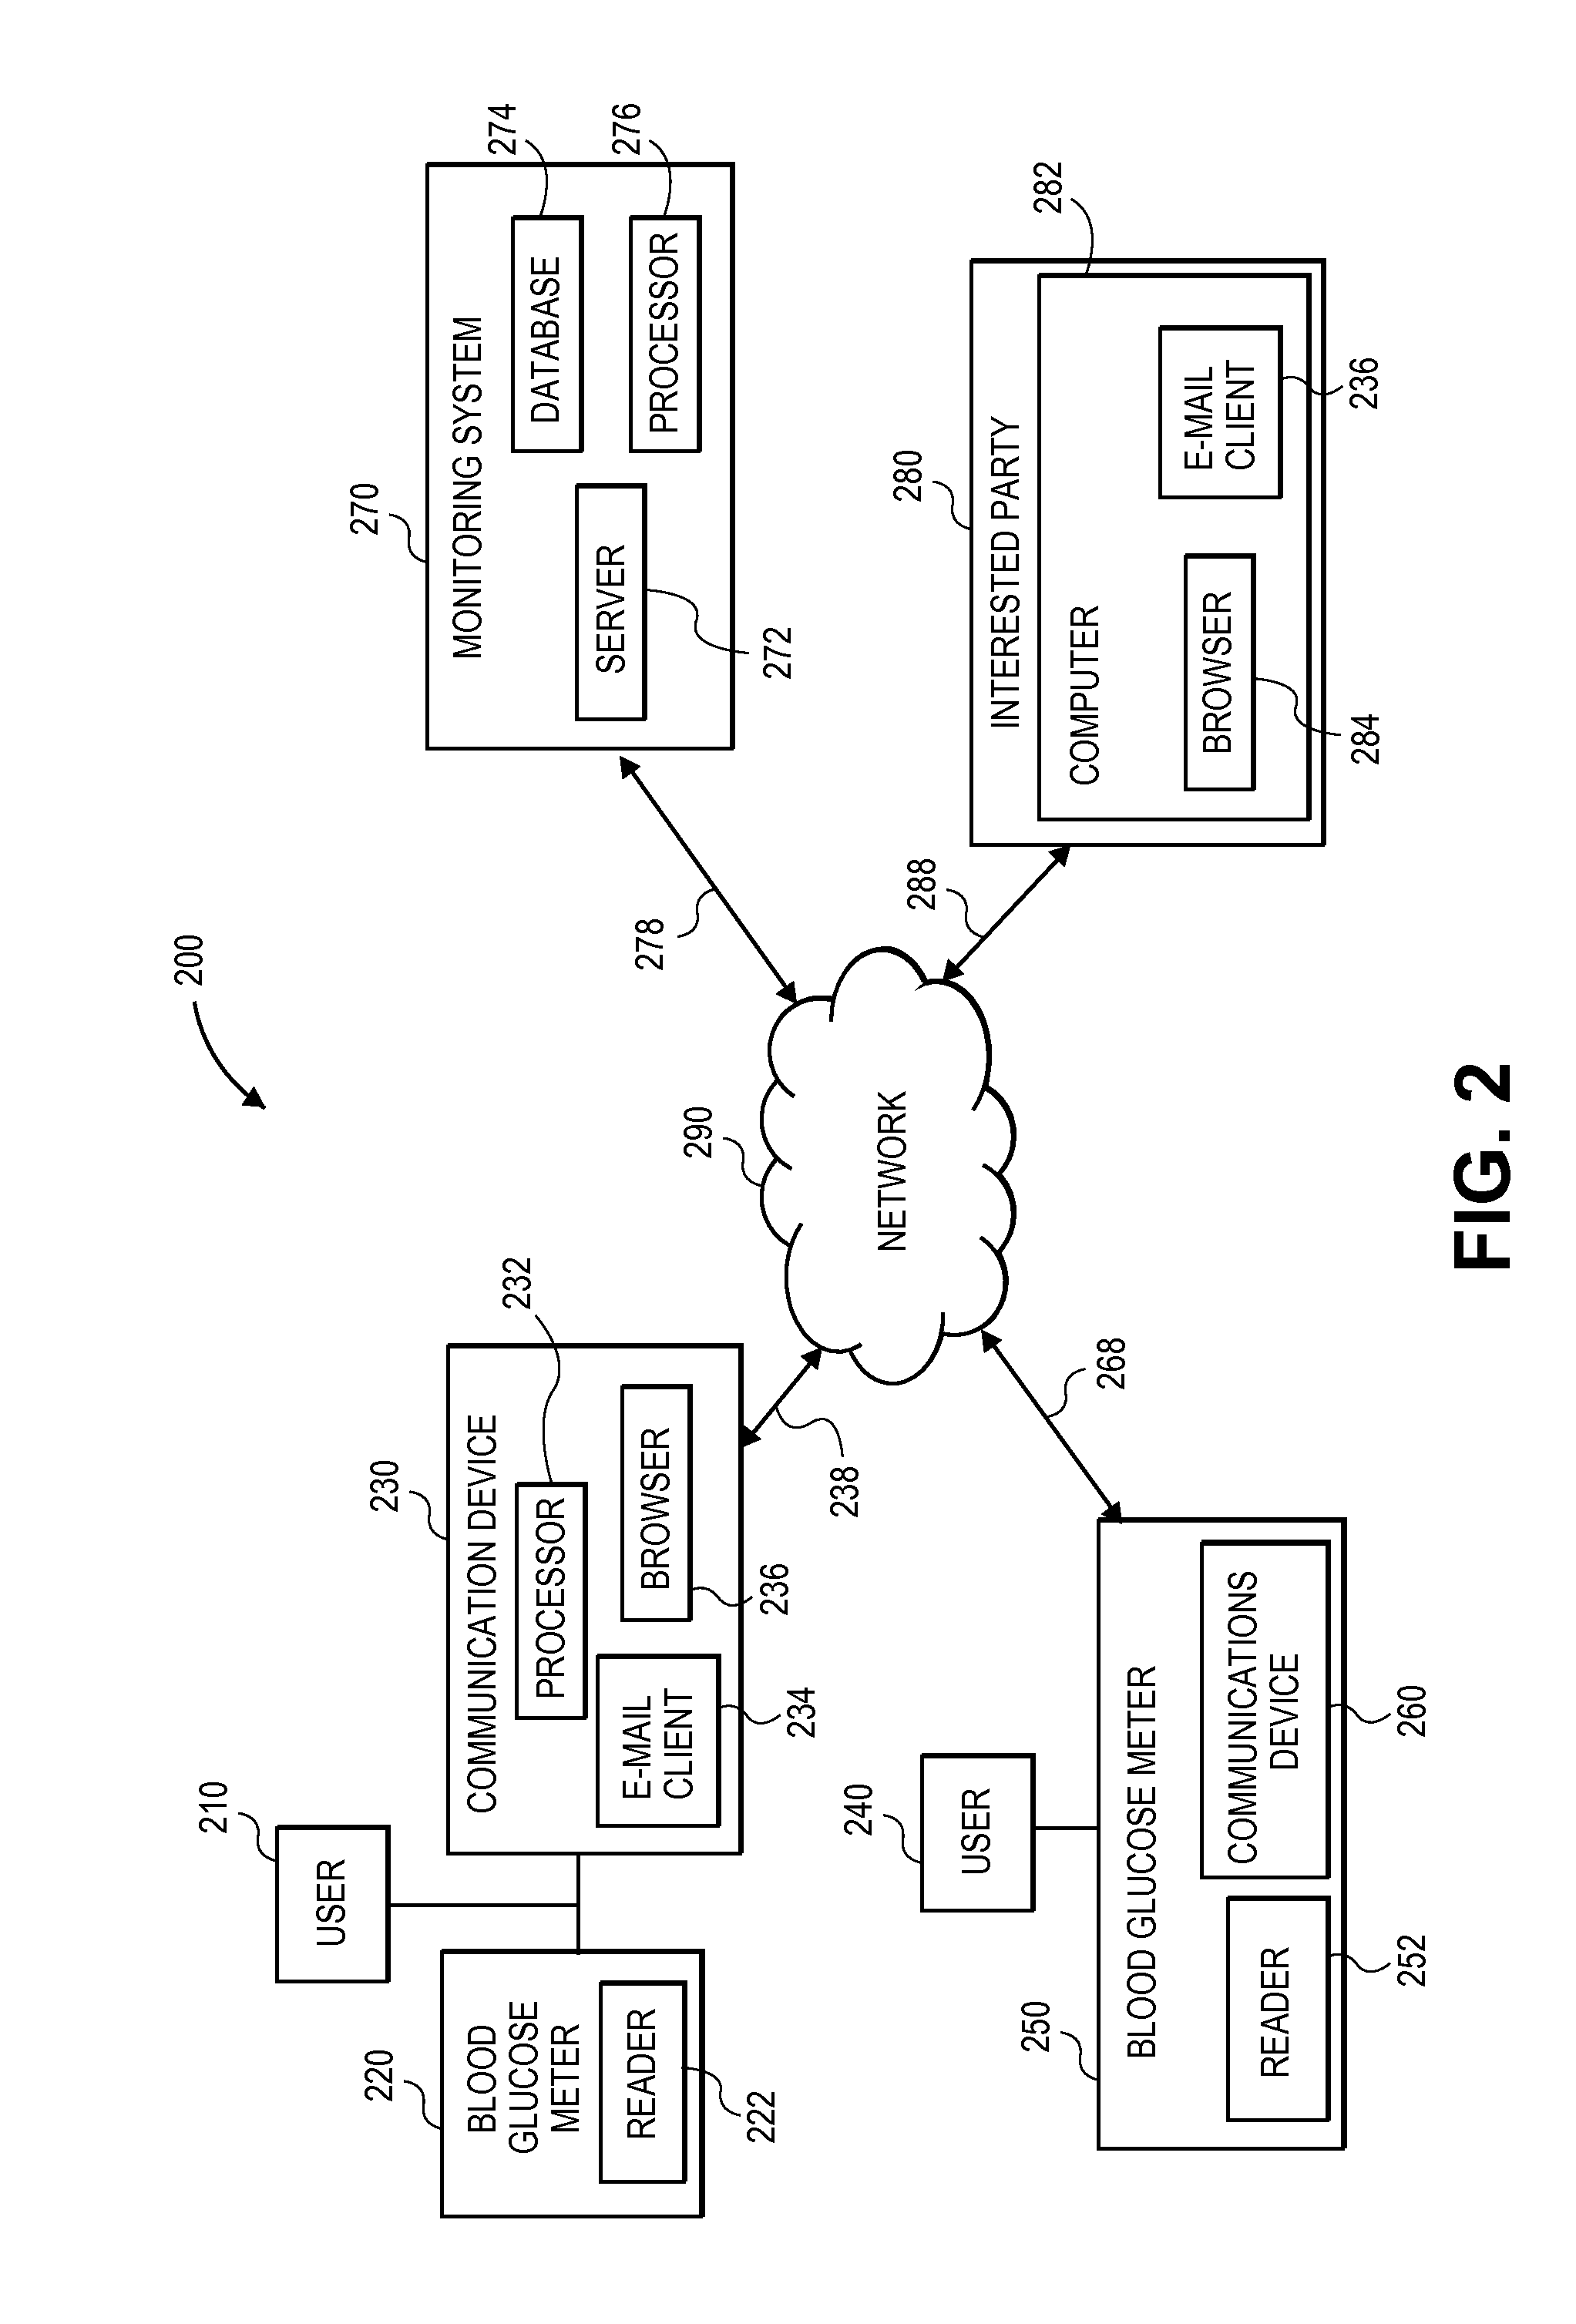 Computer-Based Monitoring of Blood Glucose Levels